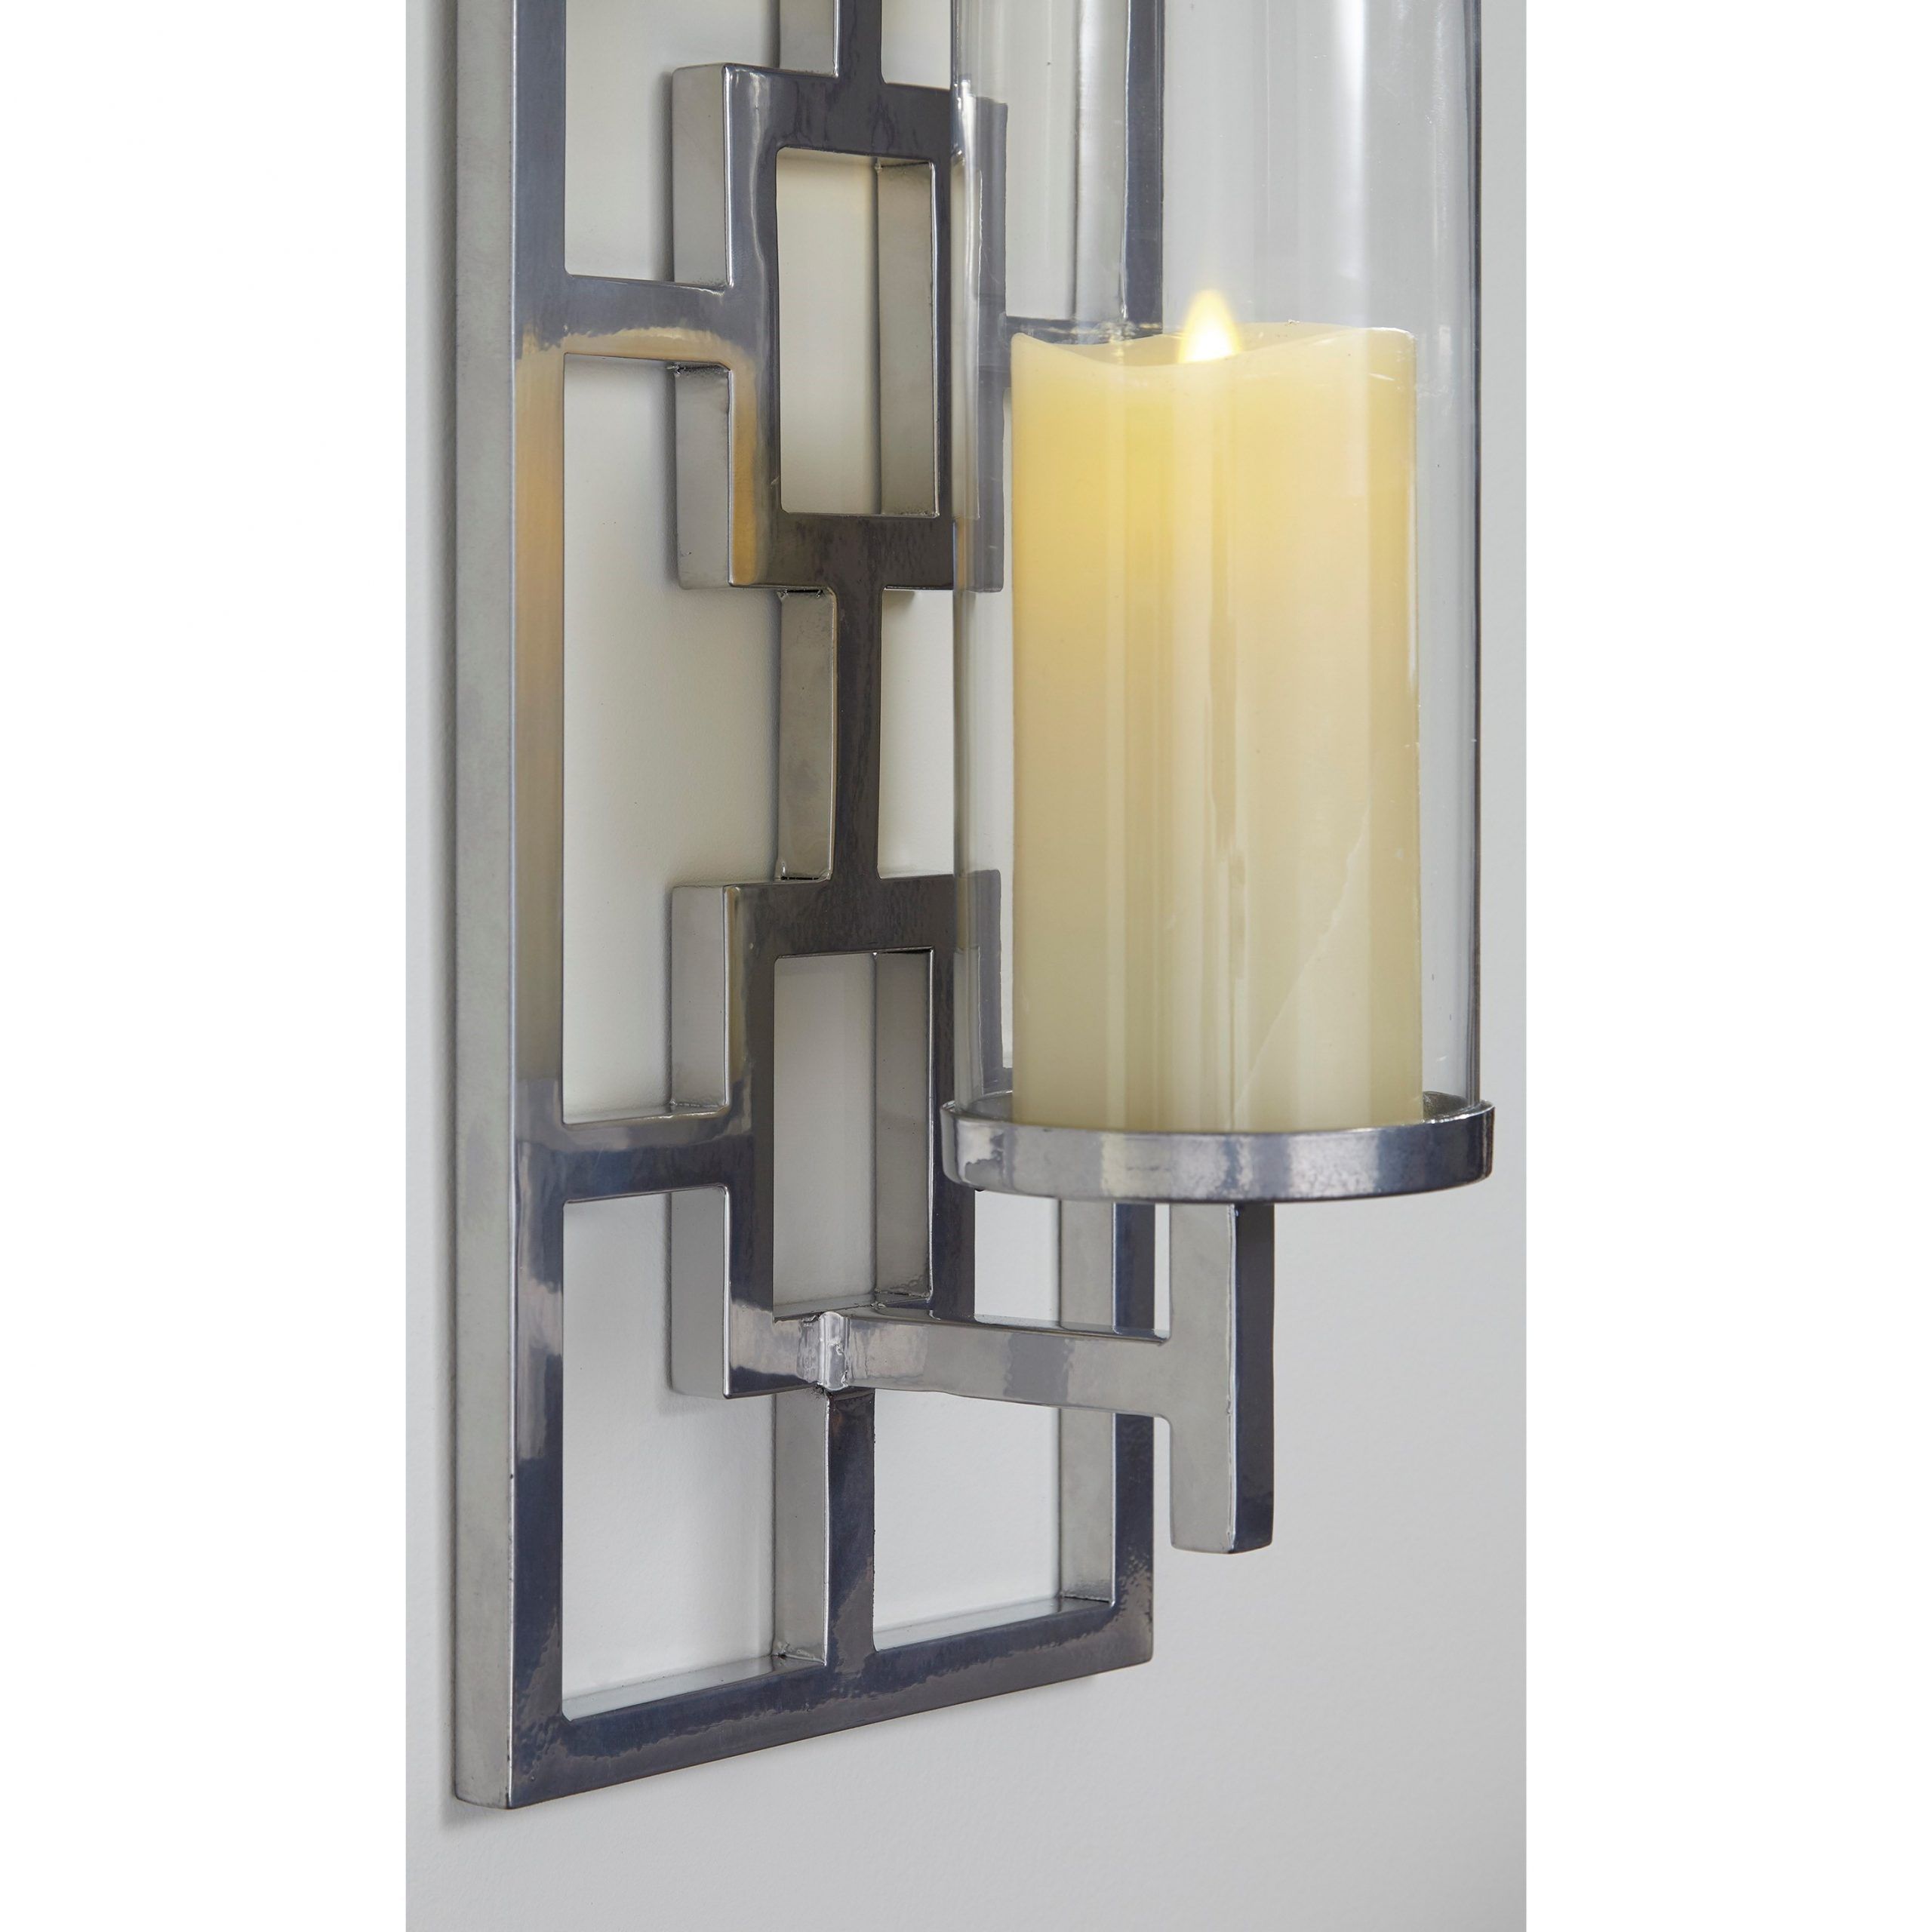 Signature Designashley Wall Art Brede Silver Finish Wall Sconce Regarding Most Recently Released Signature Wall Art (View 11 of 20)